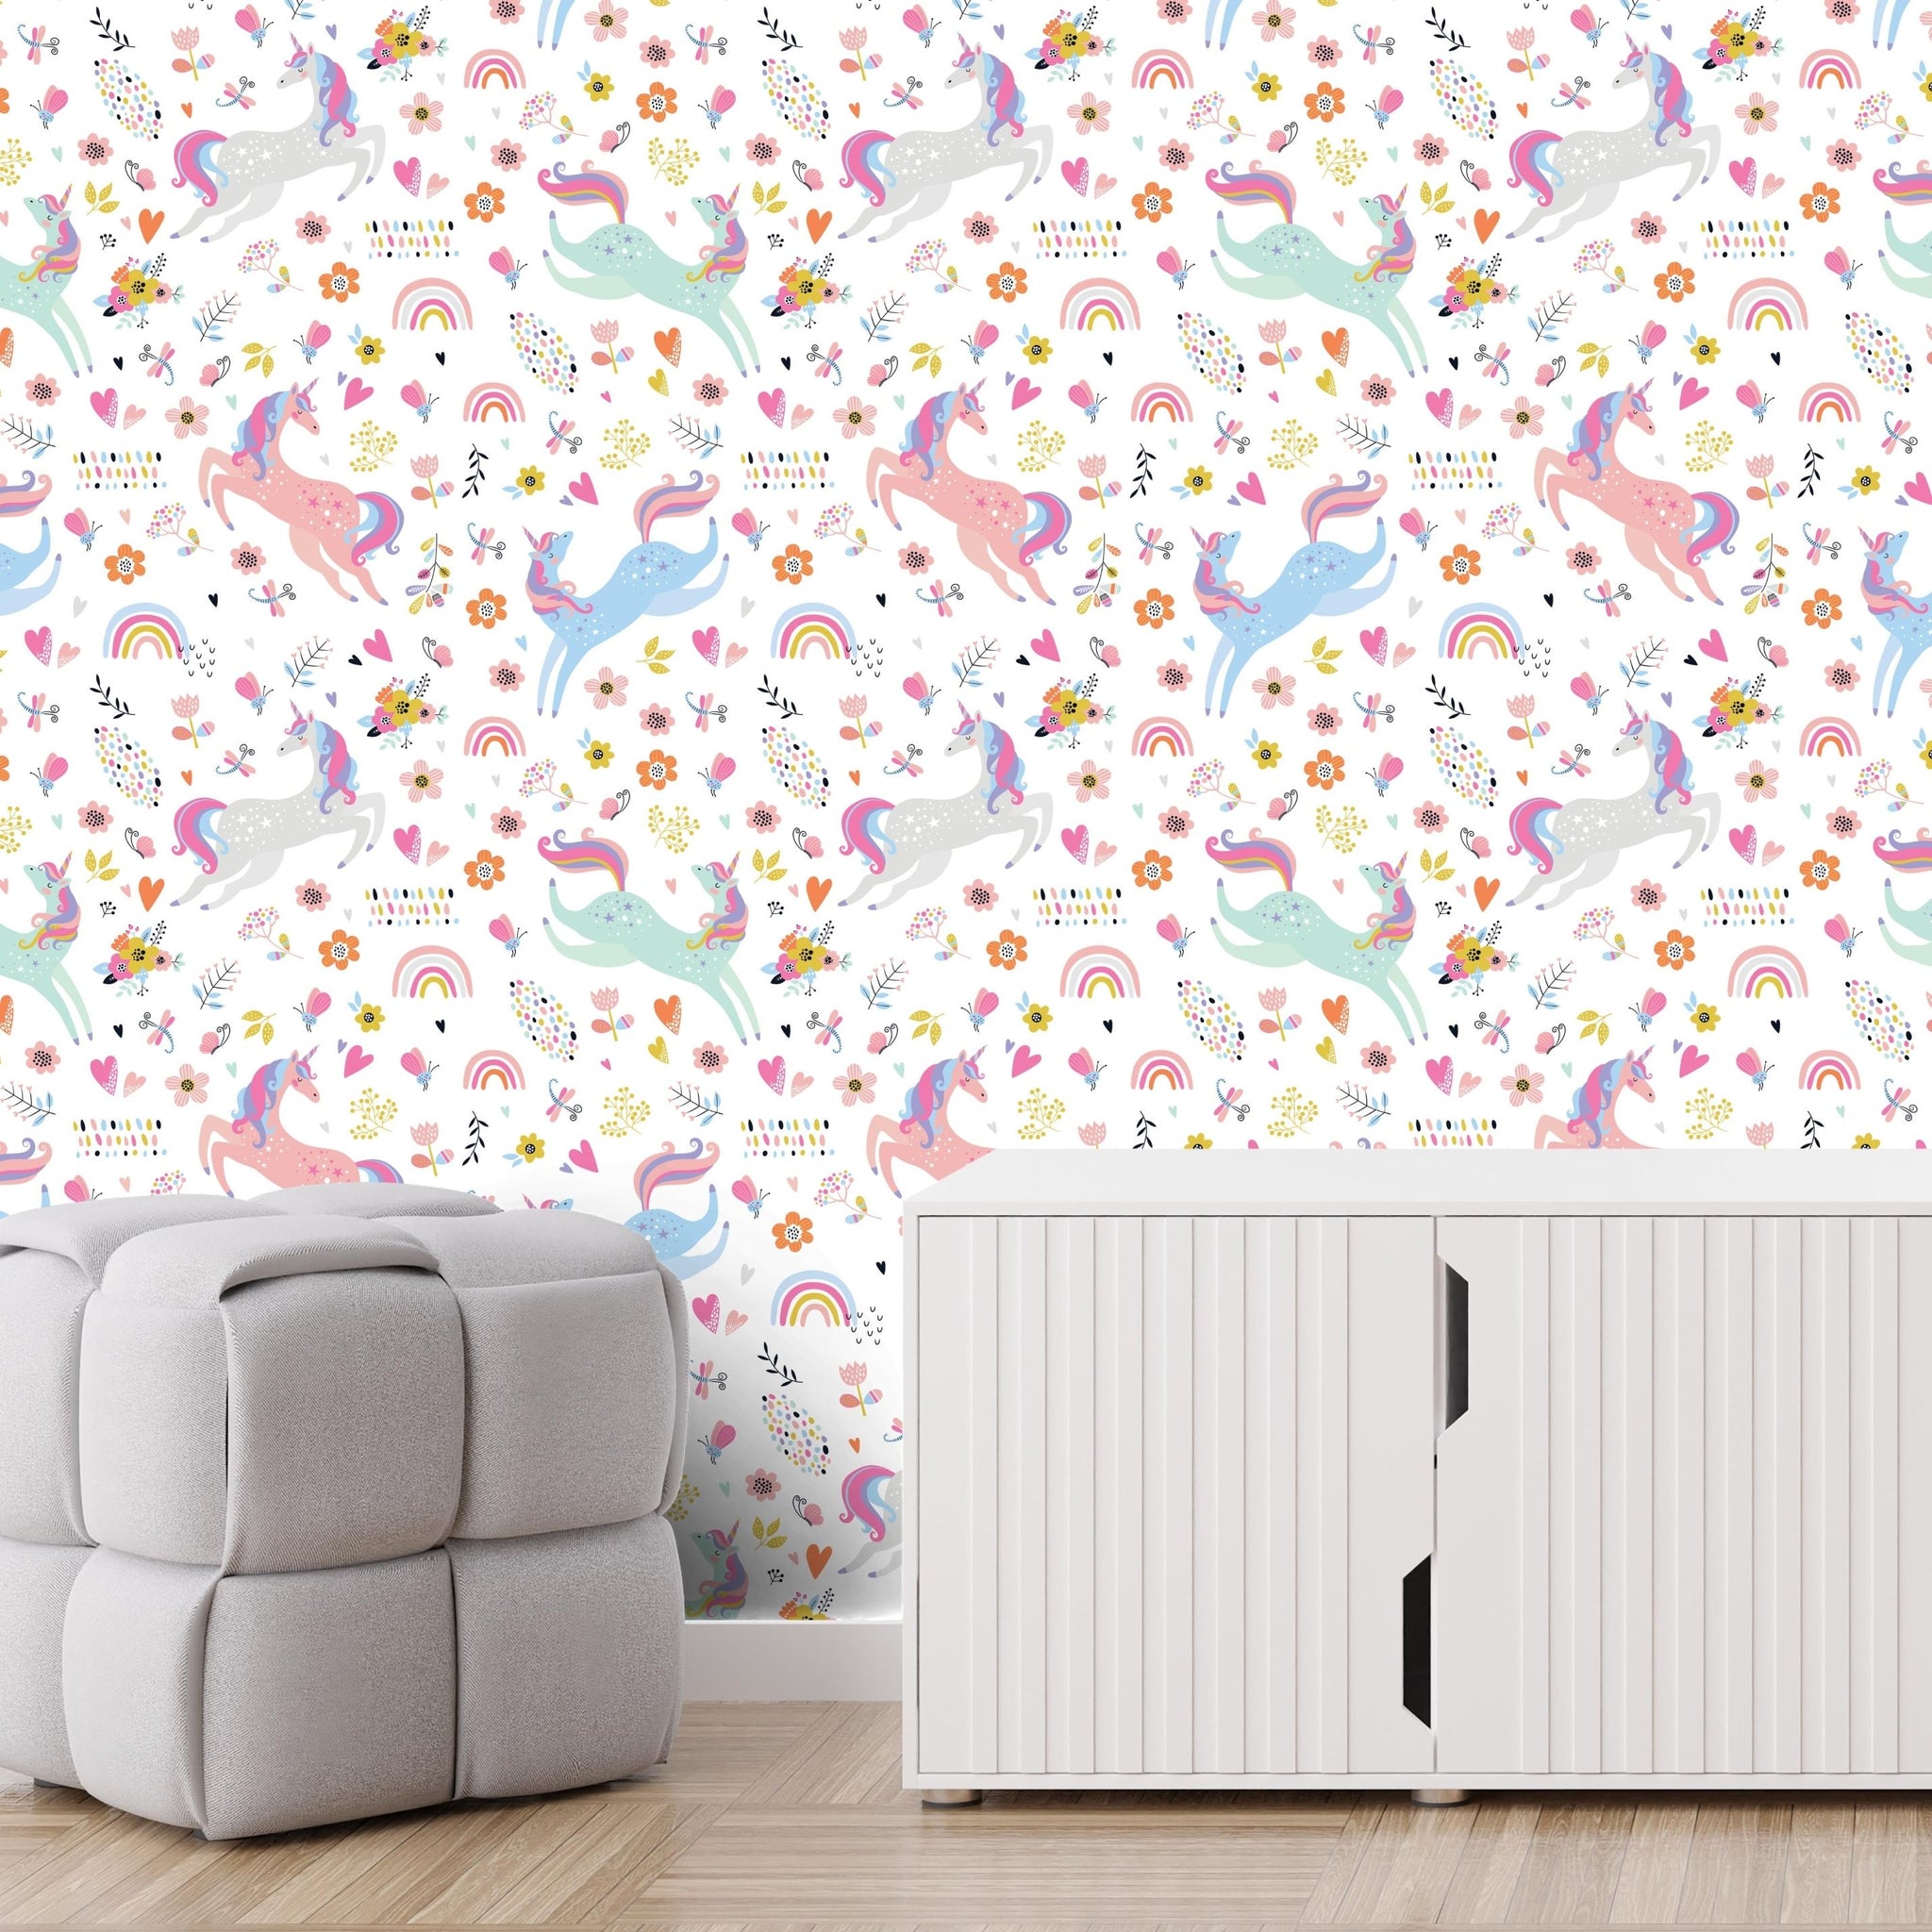 Peel and Stick or Traditional Wallpaper - Dancing Unicorns